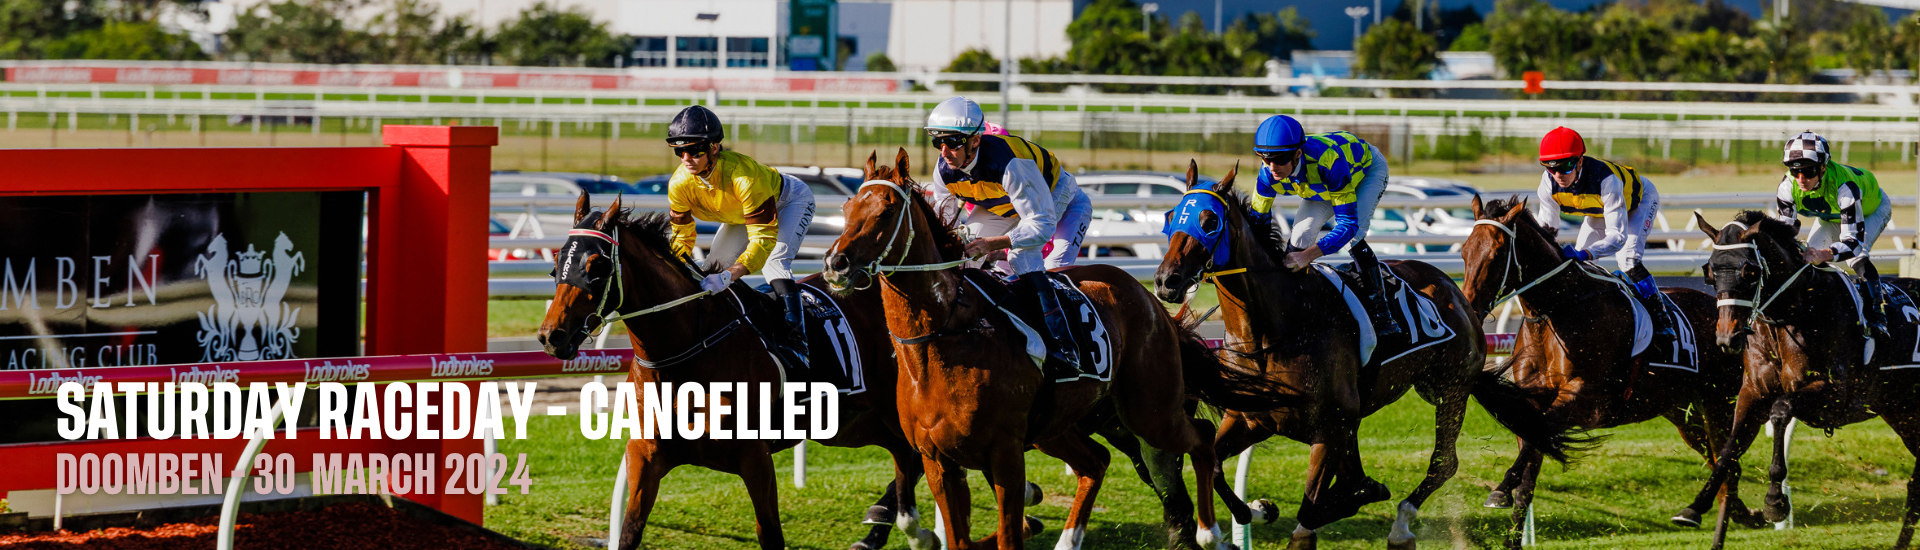 Saturday Raceday-Cancelled